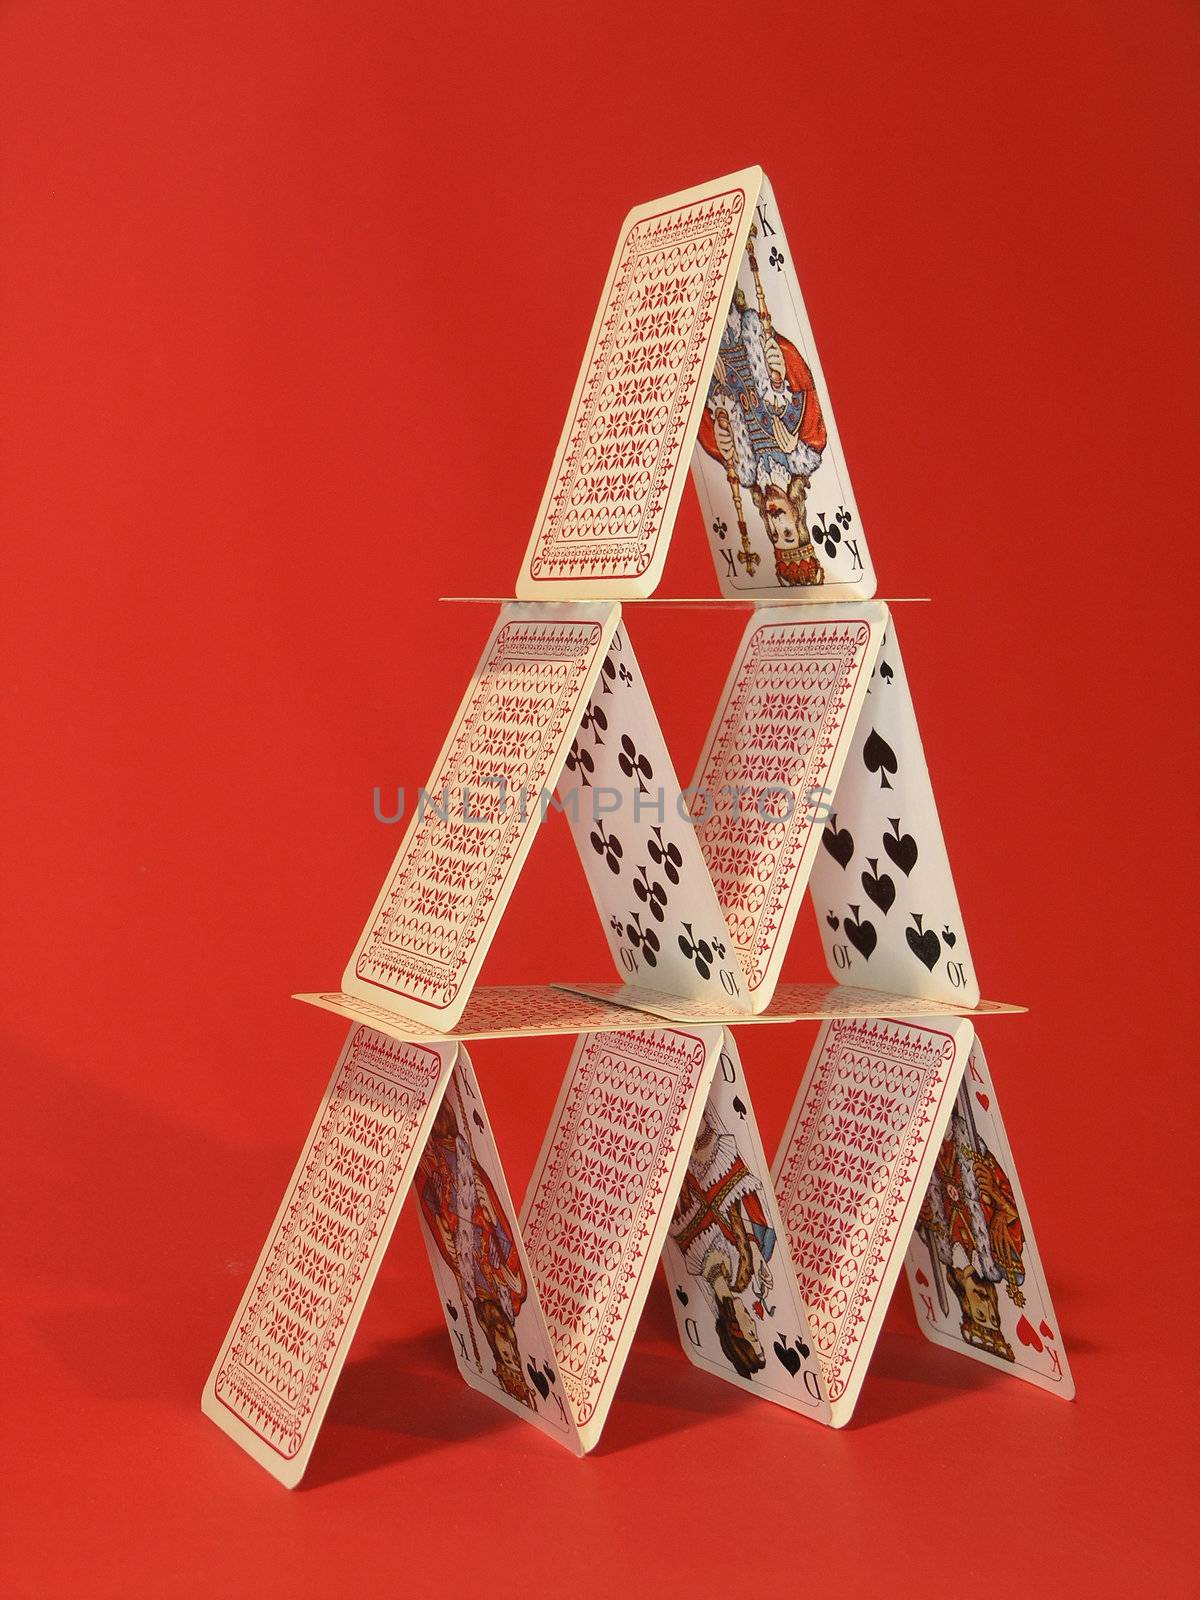 Card Tower by adamr